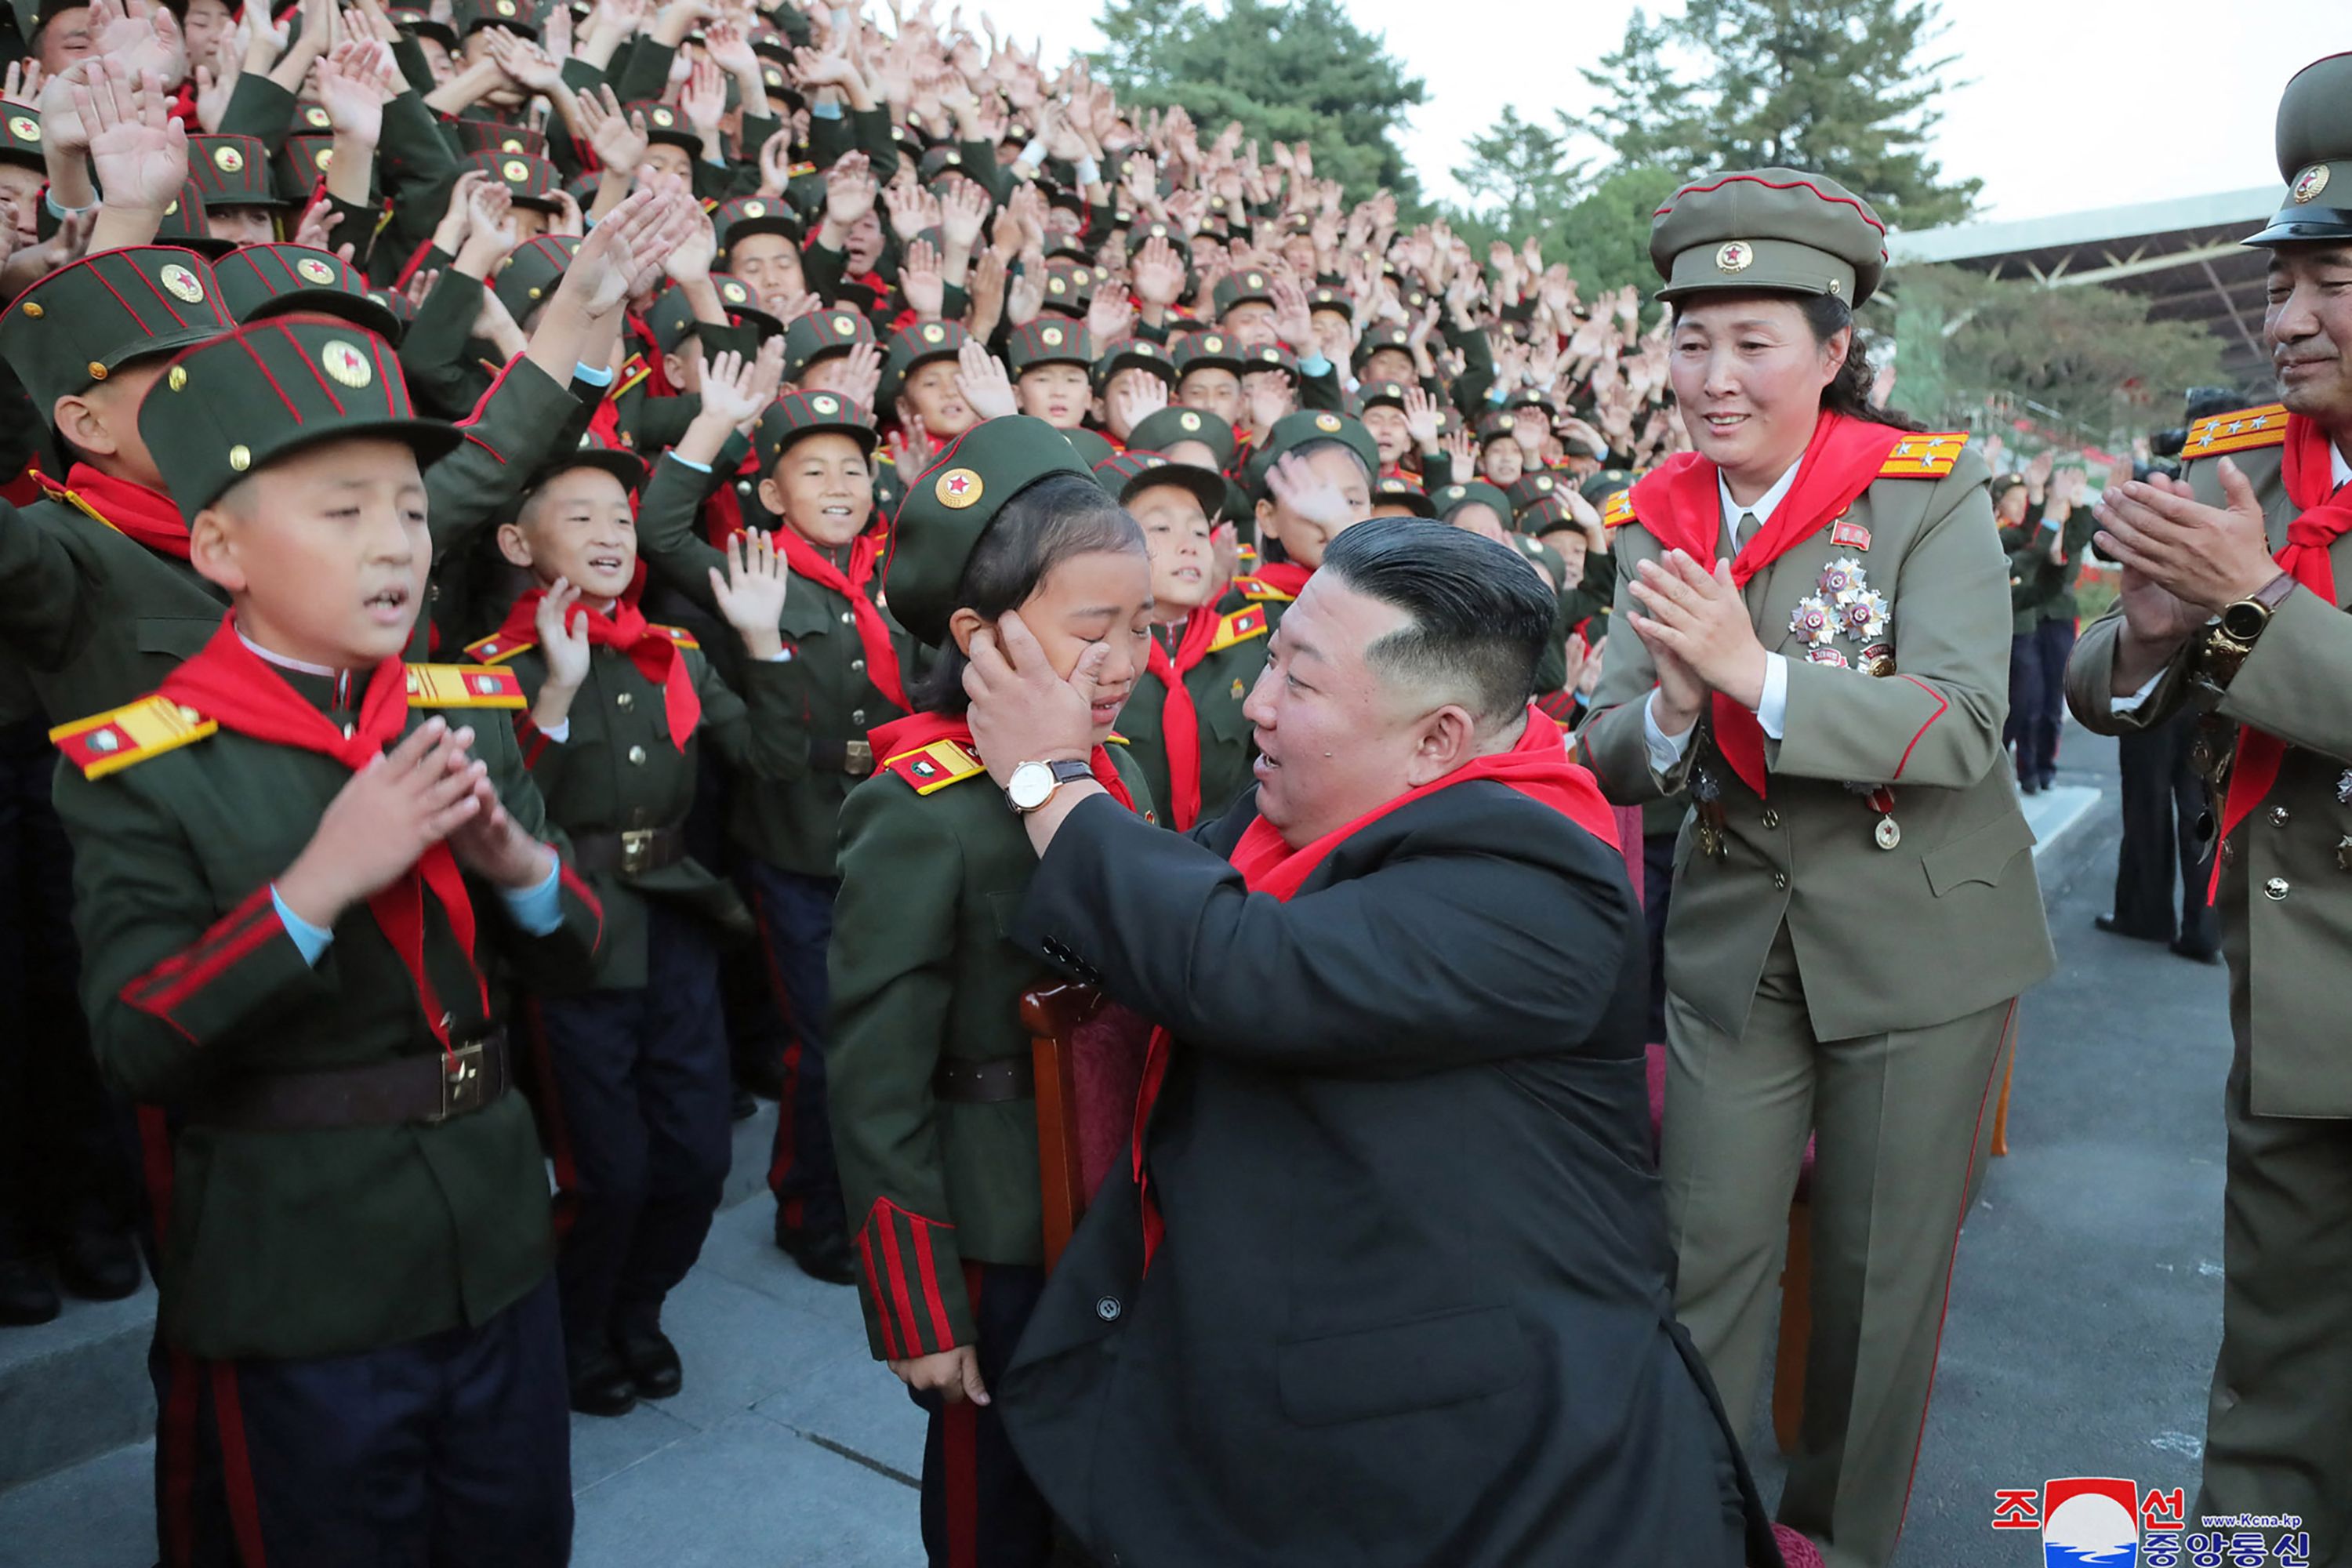 North Korean leader Kim Jong-un attending a ceremony to mark the 75th anniversary of the founding of Mangyongdae Revolutionary School and Kang Pan Sok Revolutionary School, at Mangyongdae Revolutionary School in Pyongyang on 13 October